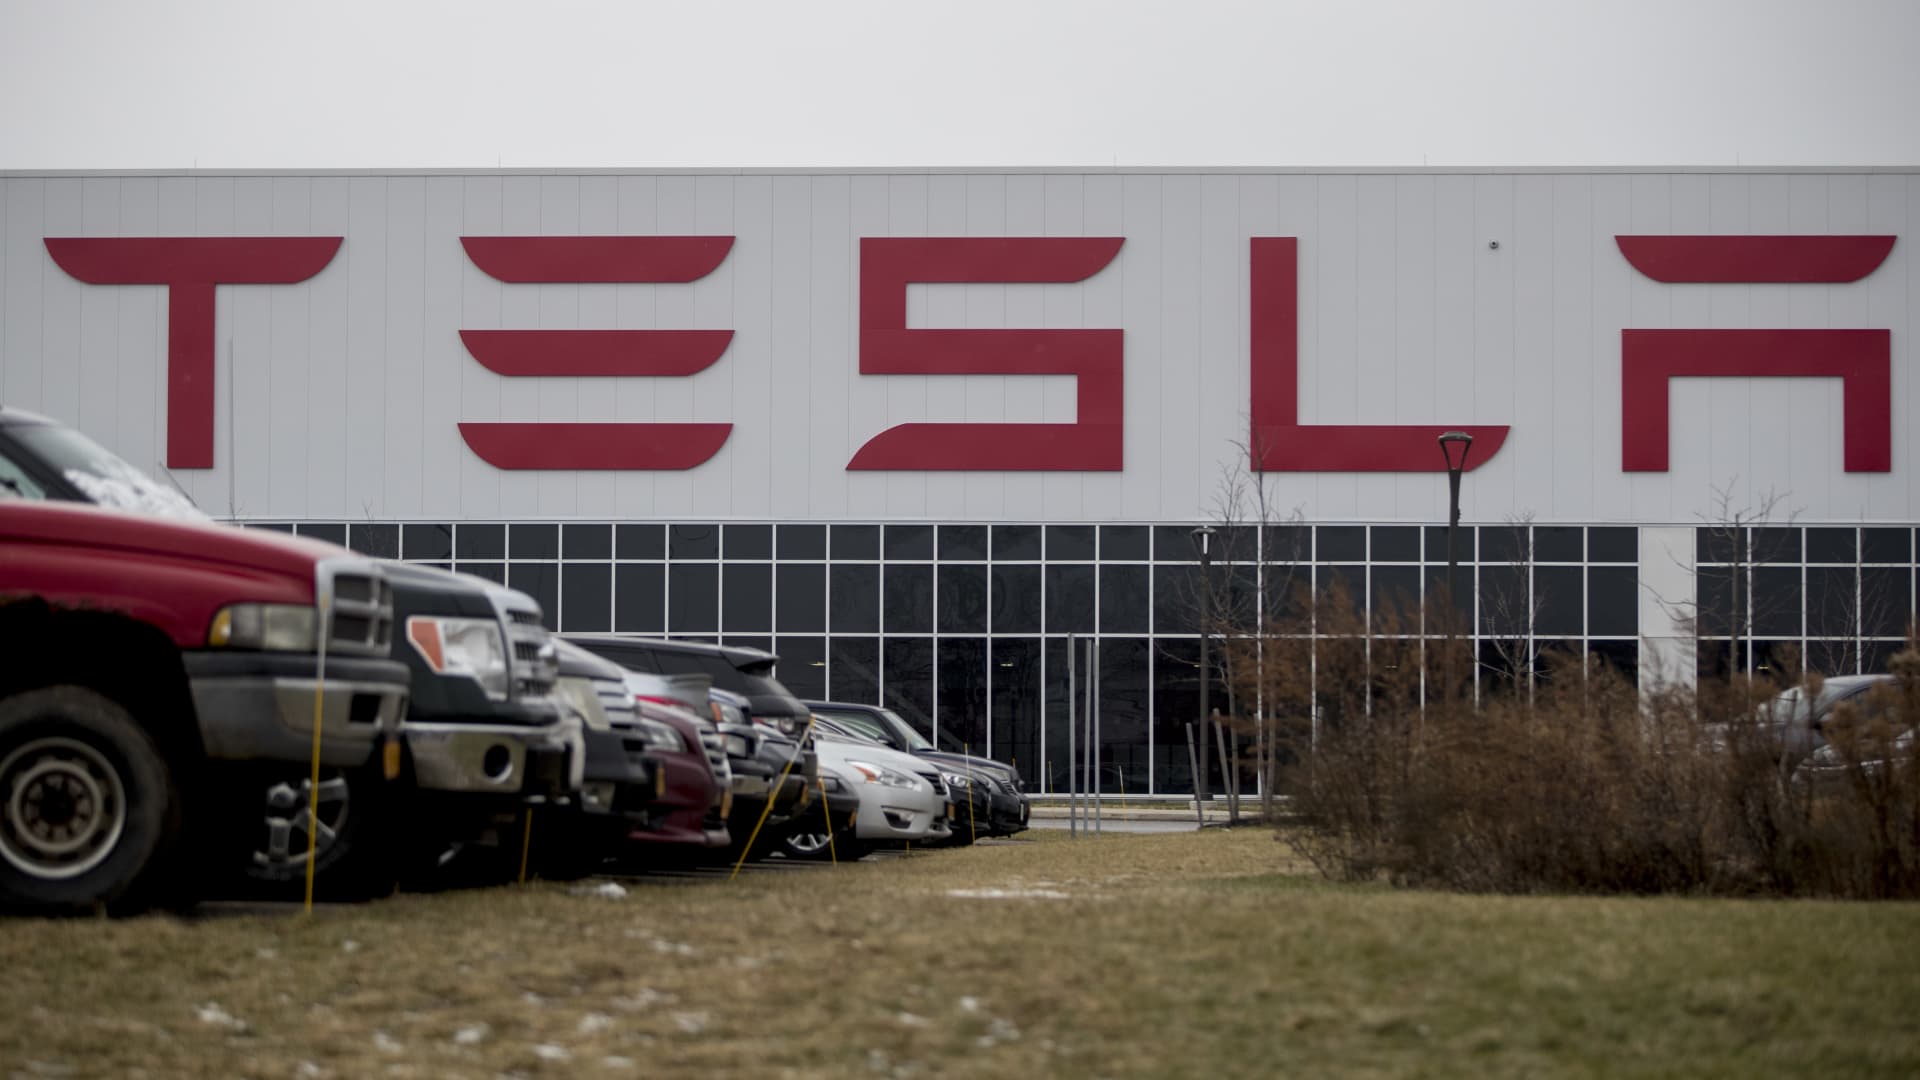 Vehicles sit parked outside the Tesla Inc. solar panel factory in Buffalo, New York, U.S., on Wednesday, Dec. 26, 2018.